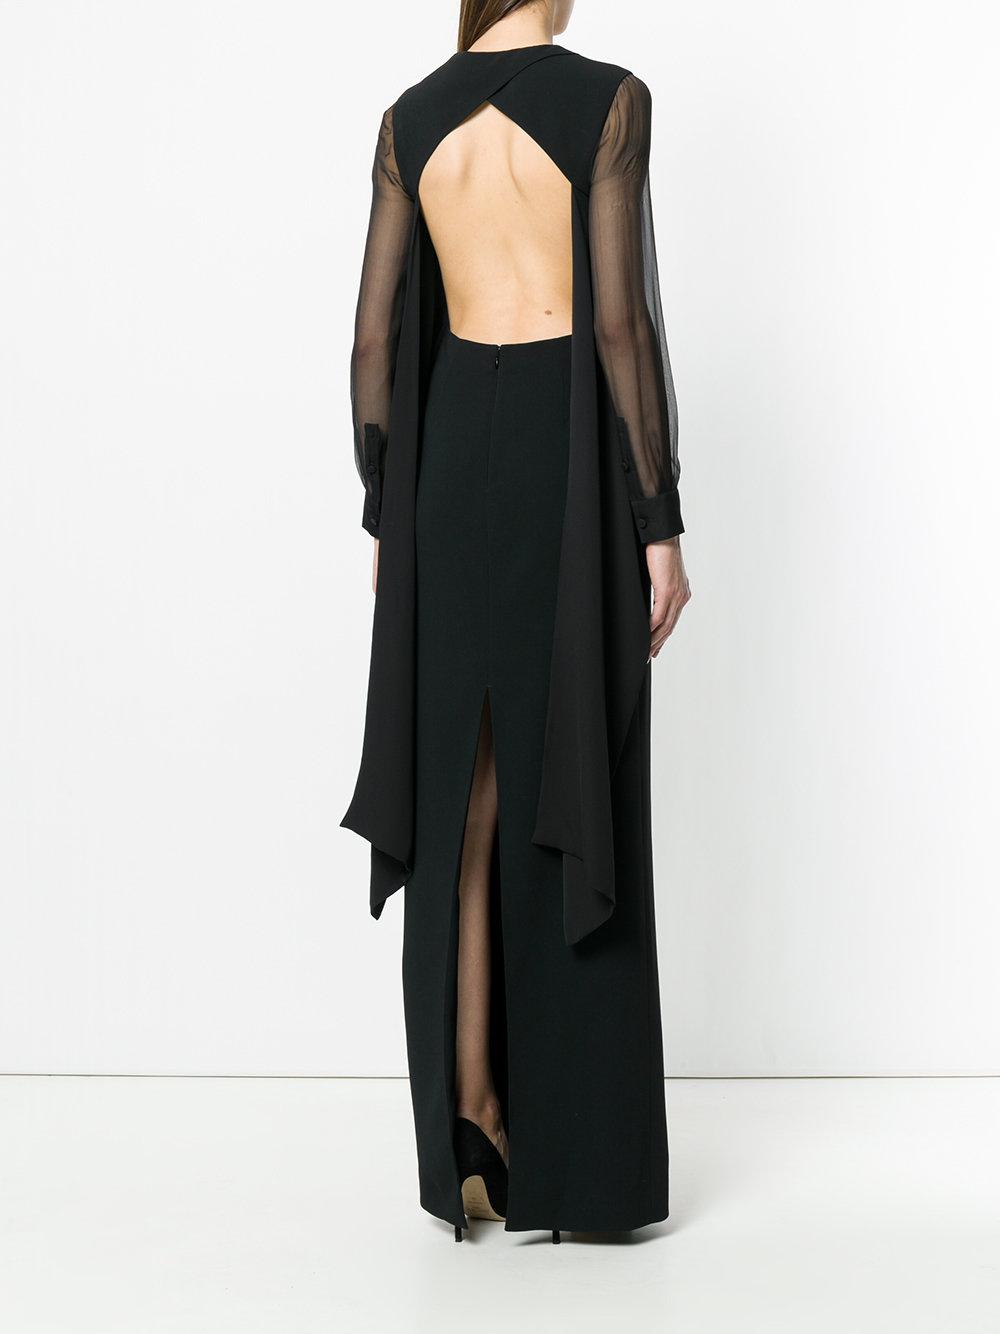 Givenchy Silk Sheer Sleeve Evening Dress in Black - Lyst